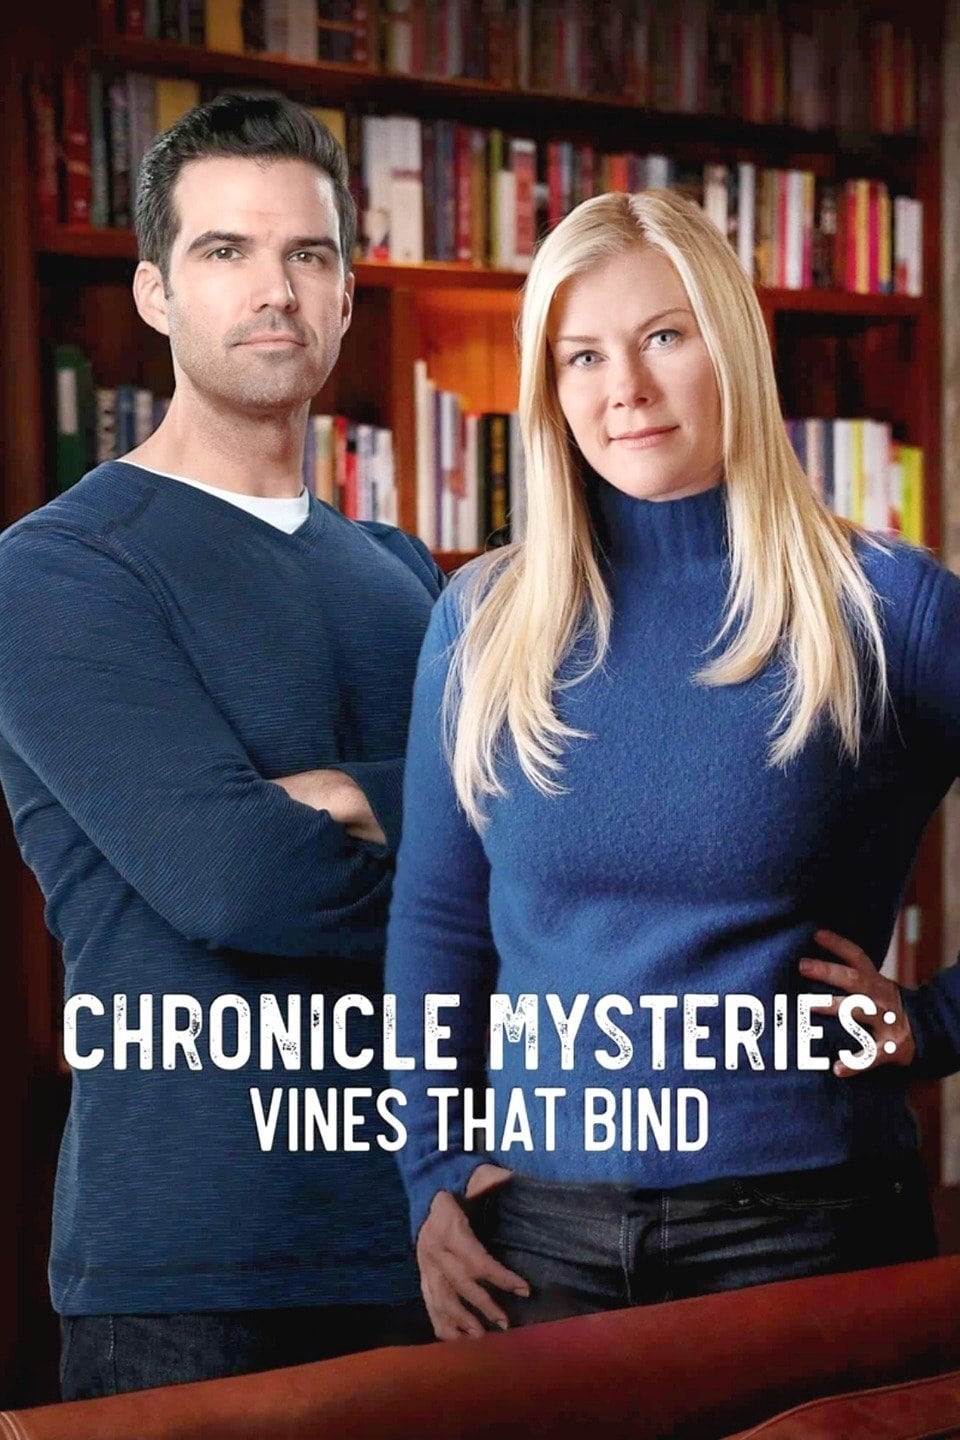 Chronicle Mysteries: Vines that Bind (2019)